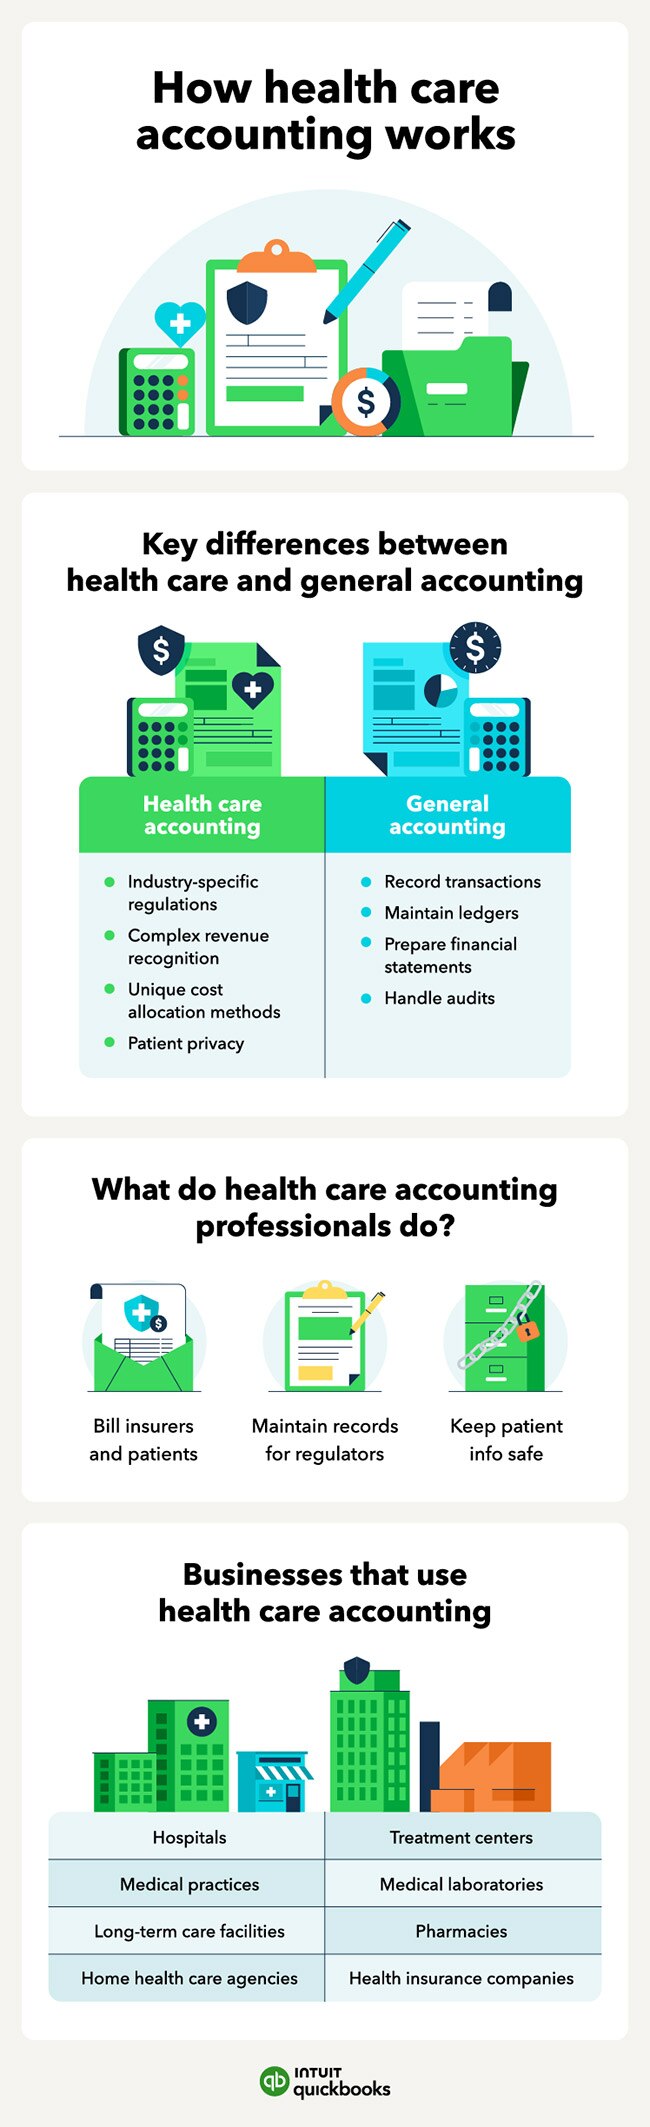 An infographic of how health care accounting works.